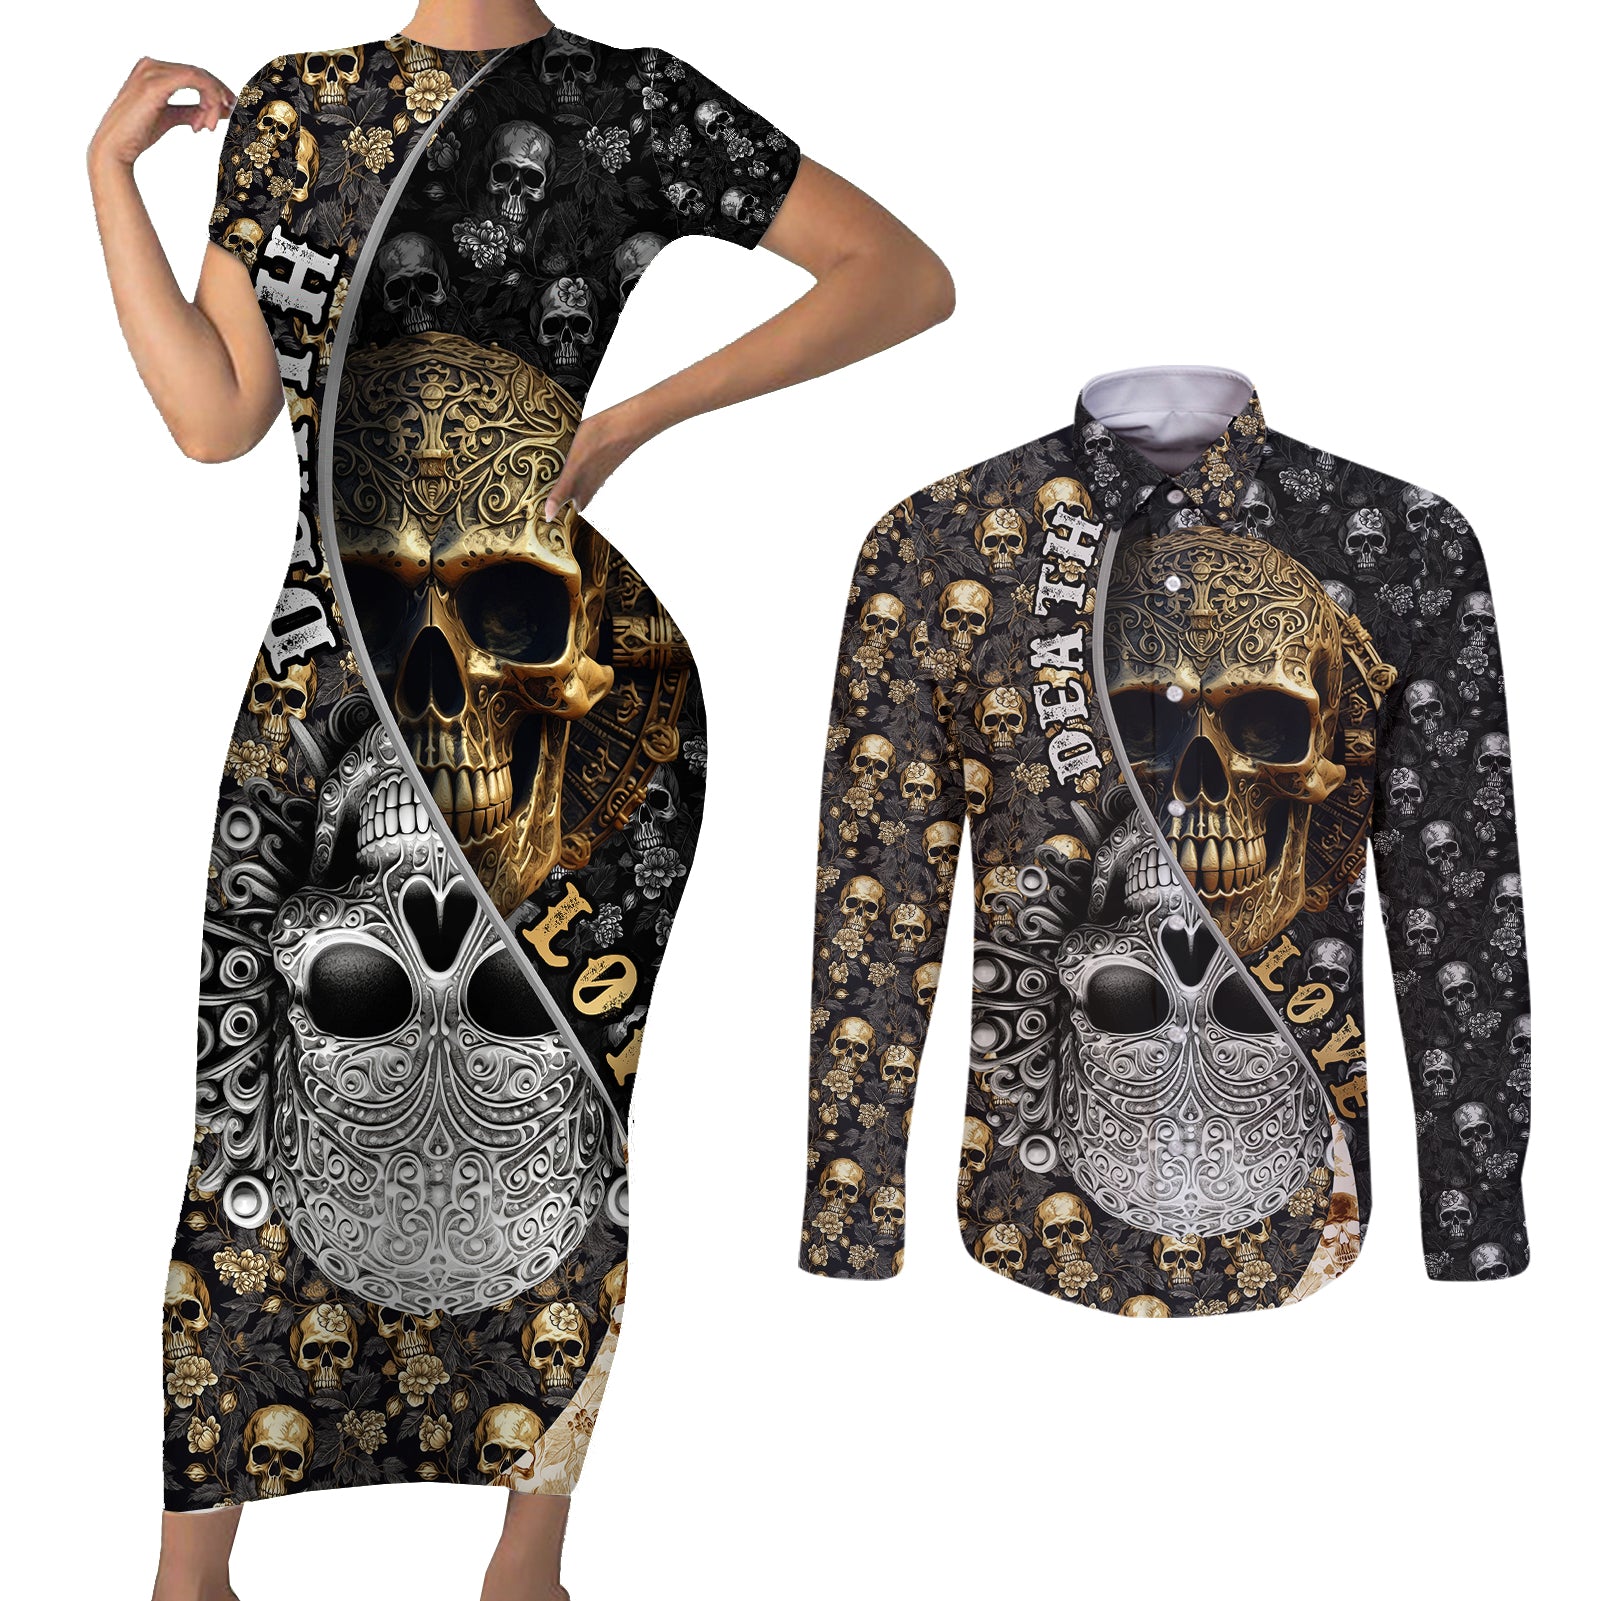 skull-pattern-couples-matching-short-sleeve-bodycon-dress-and-long-sleeve-button-shirts-love-and-death